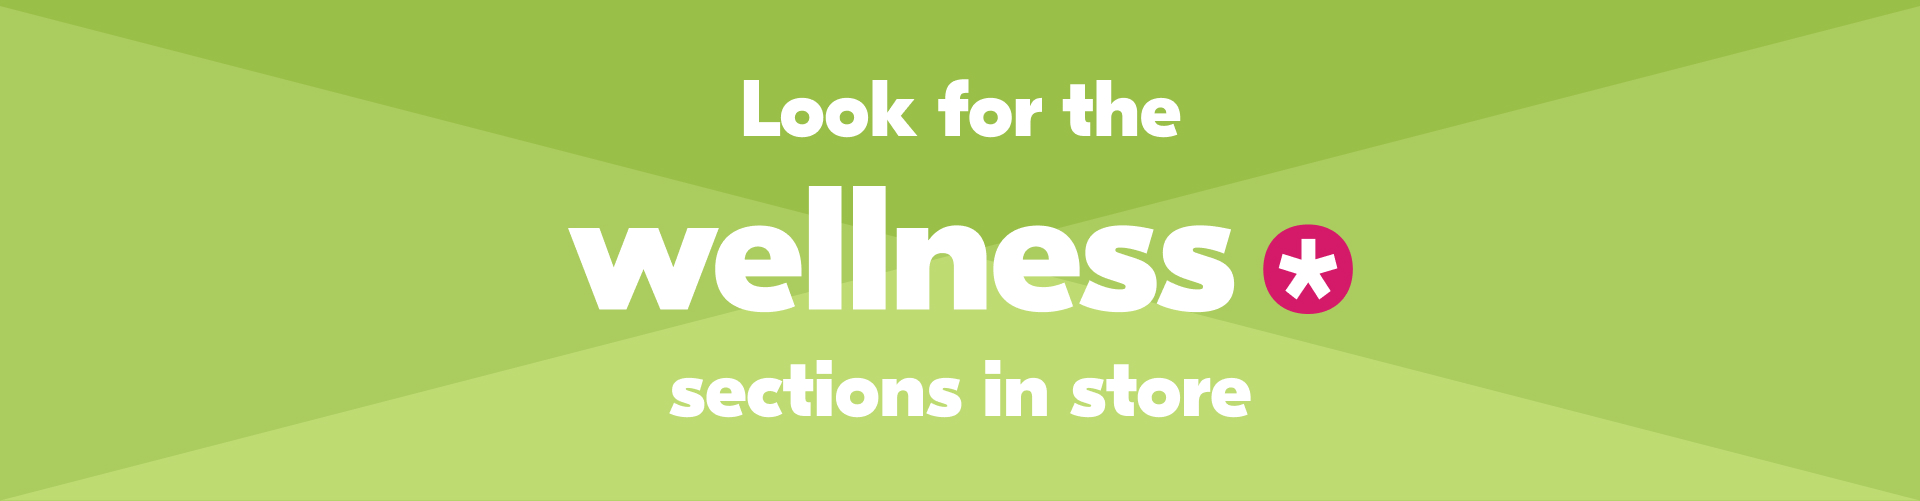 Look for the wellness section in store